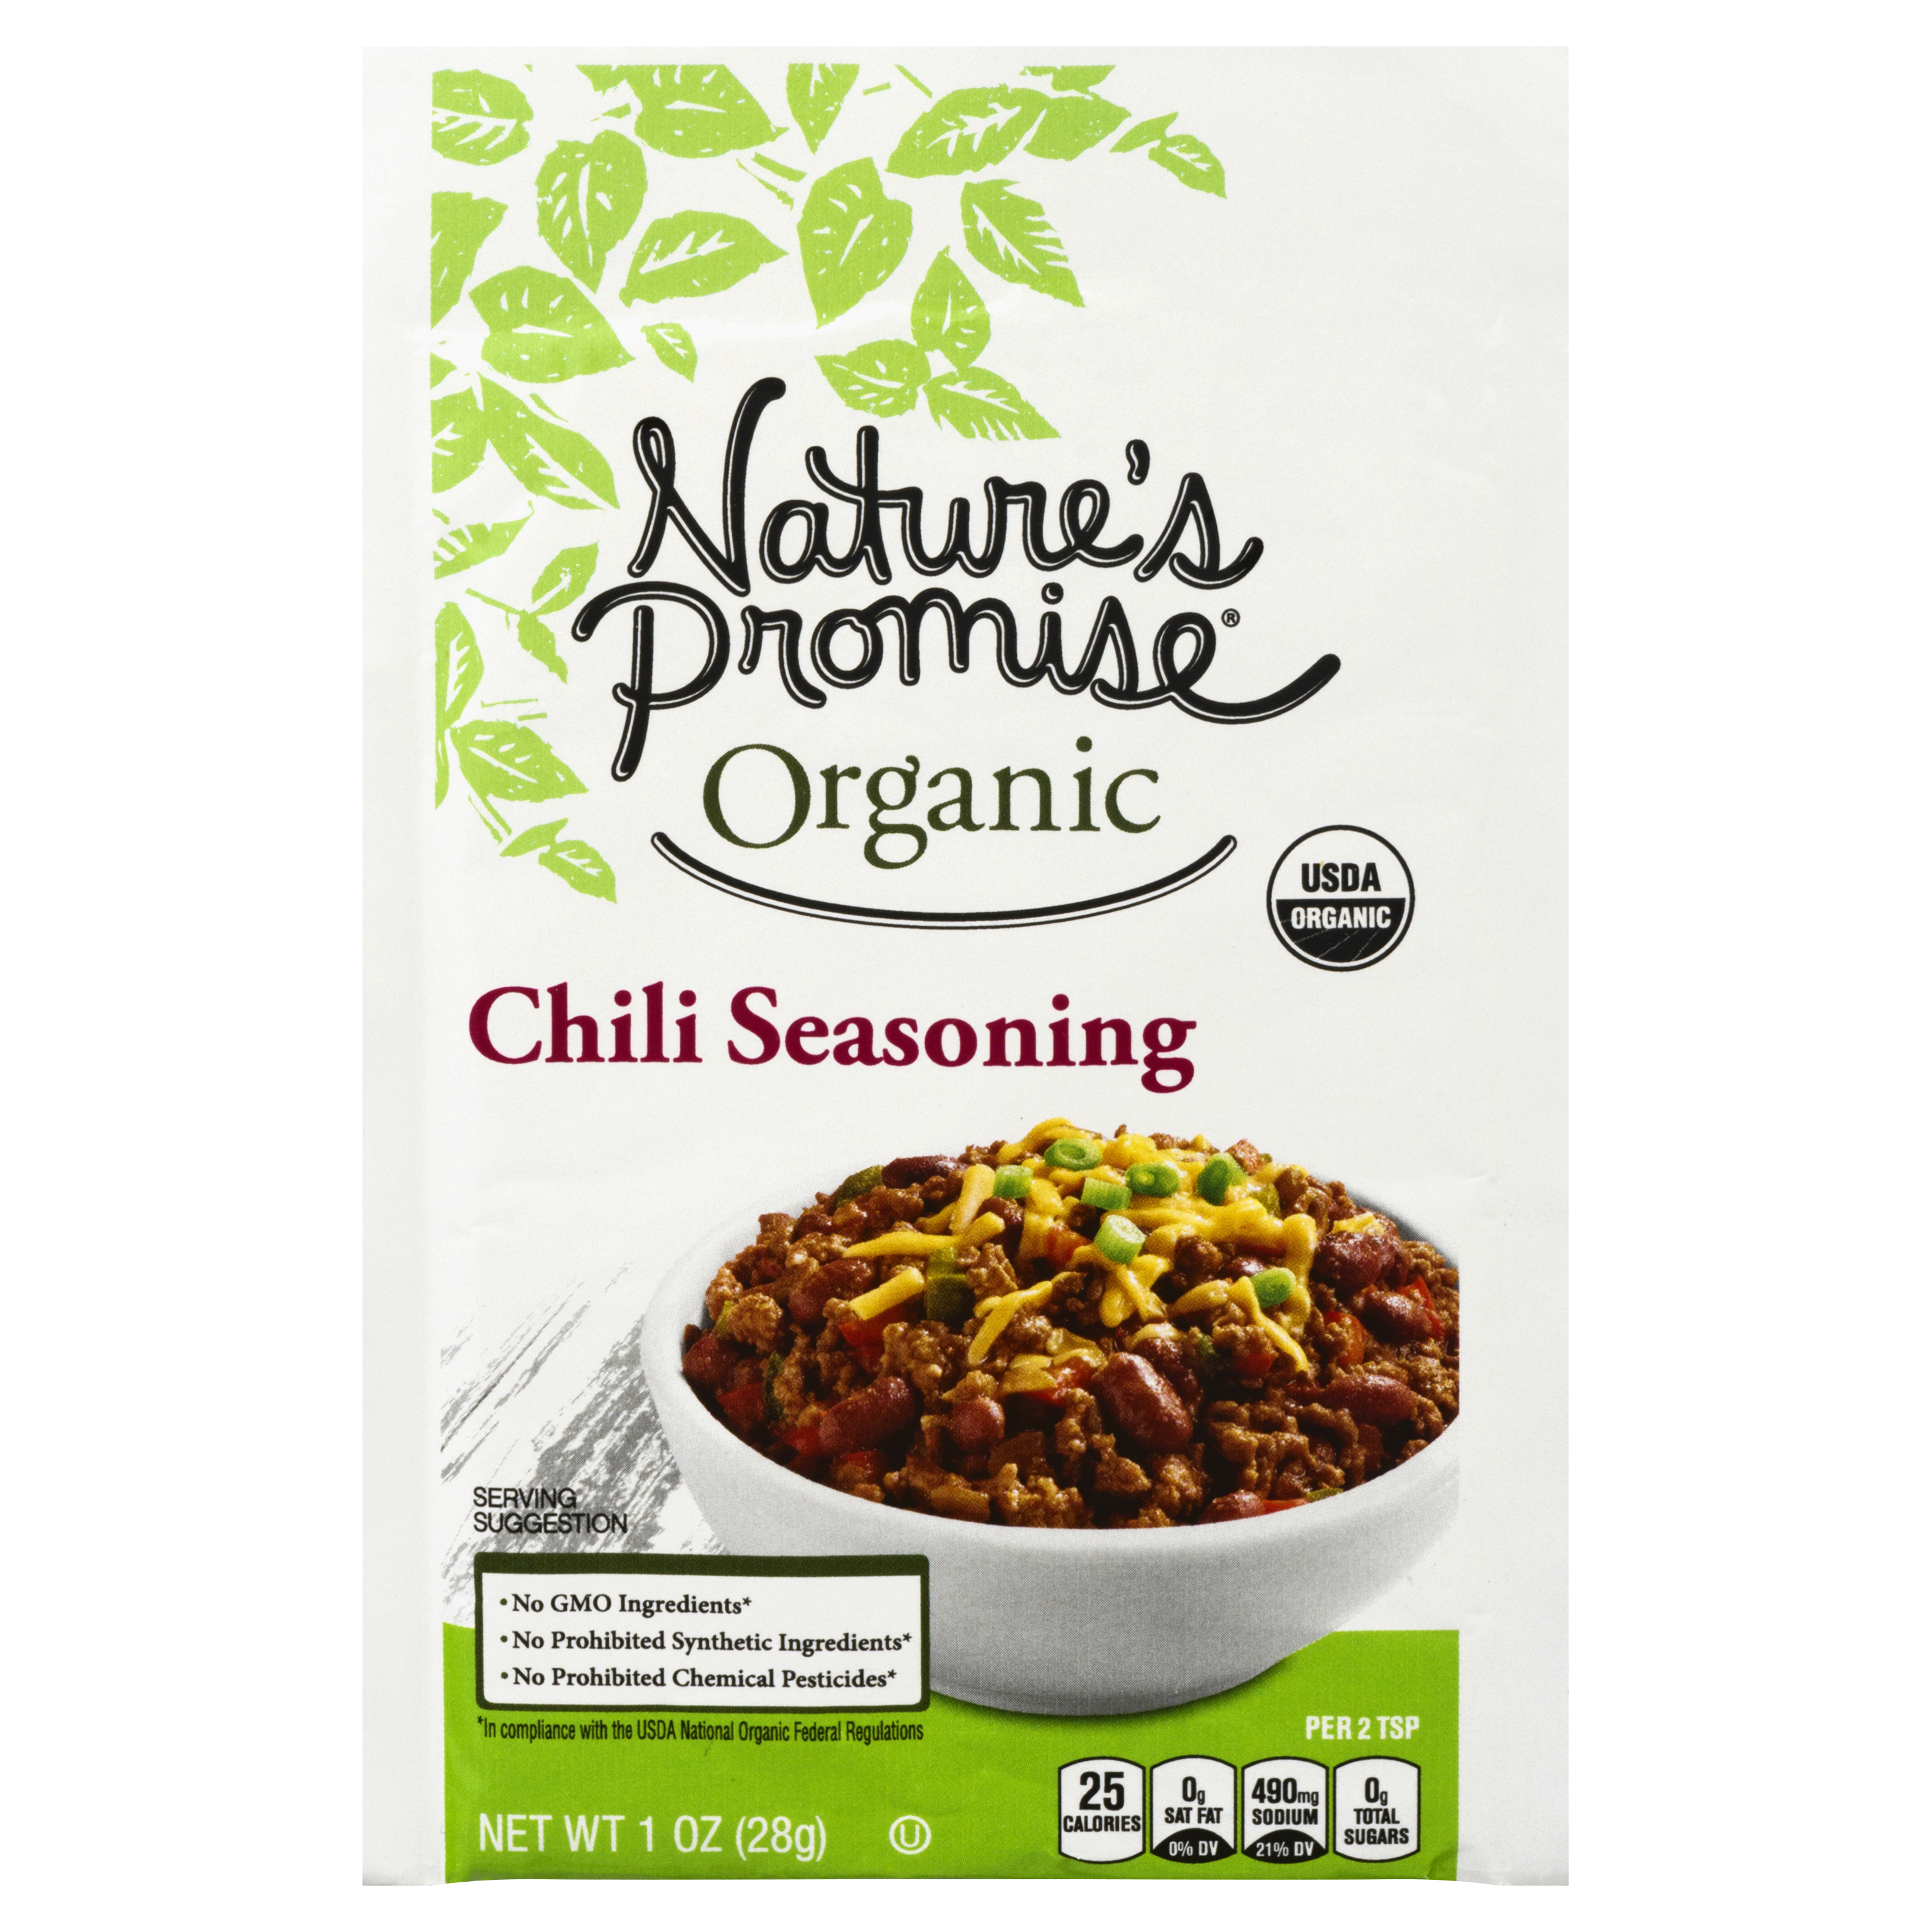 Save on Nature's Promise Organic Italian Seasoning Order Online Delivery